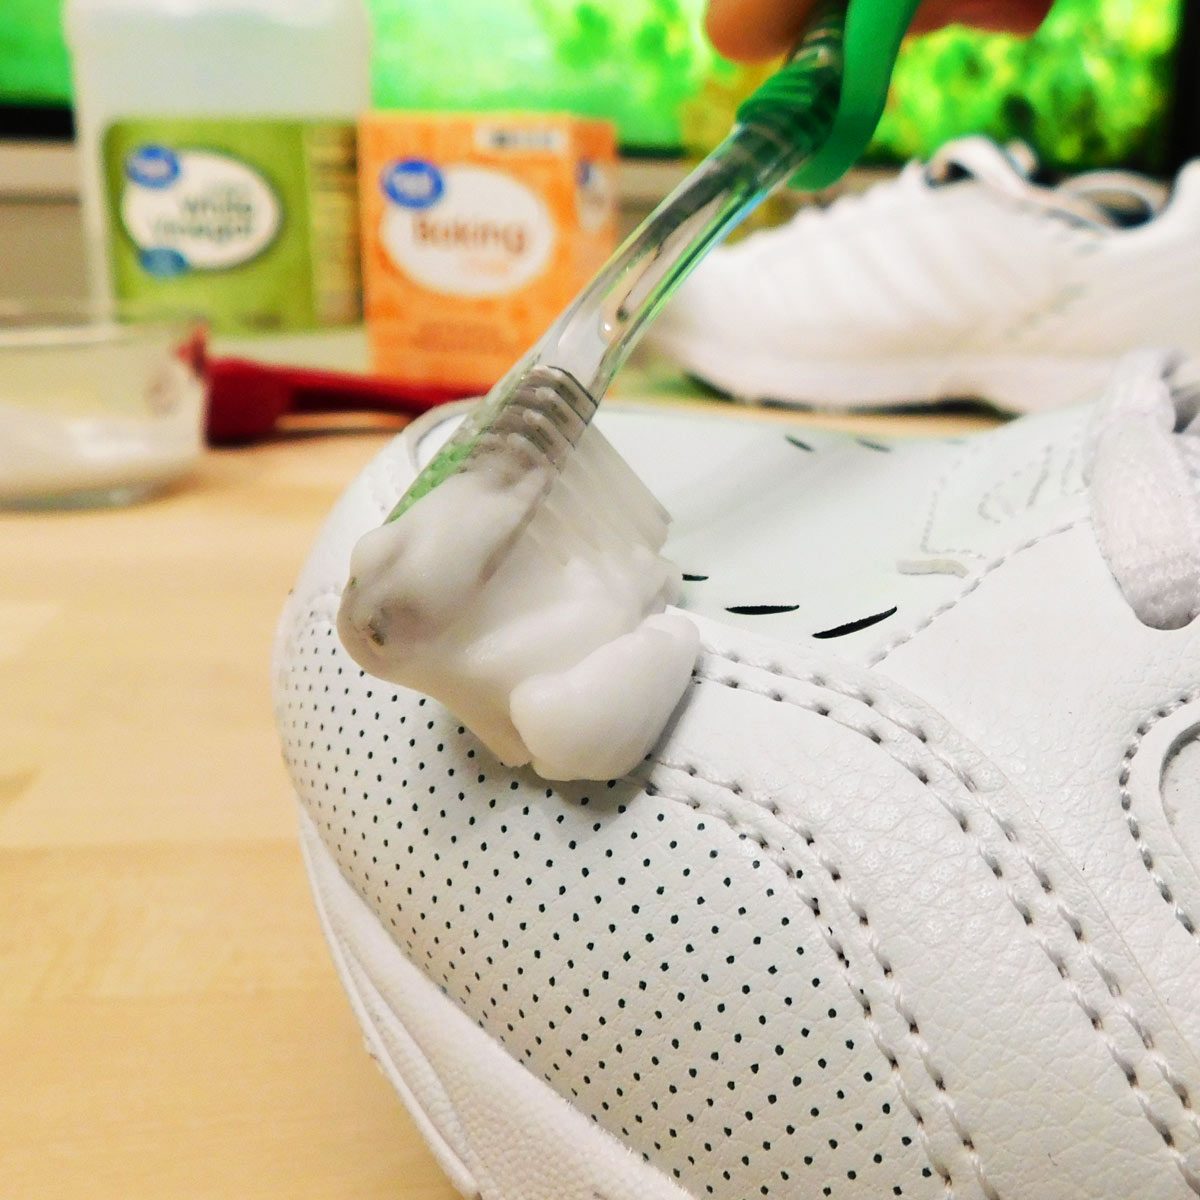 cleaning shoes with baking soda and vinegar